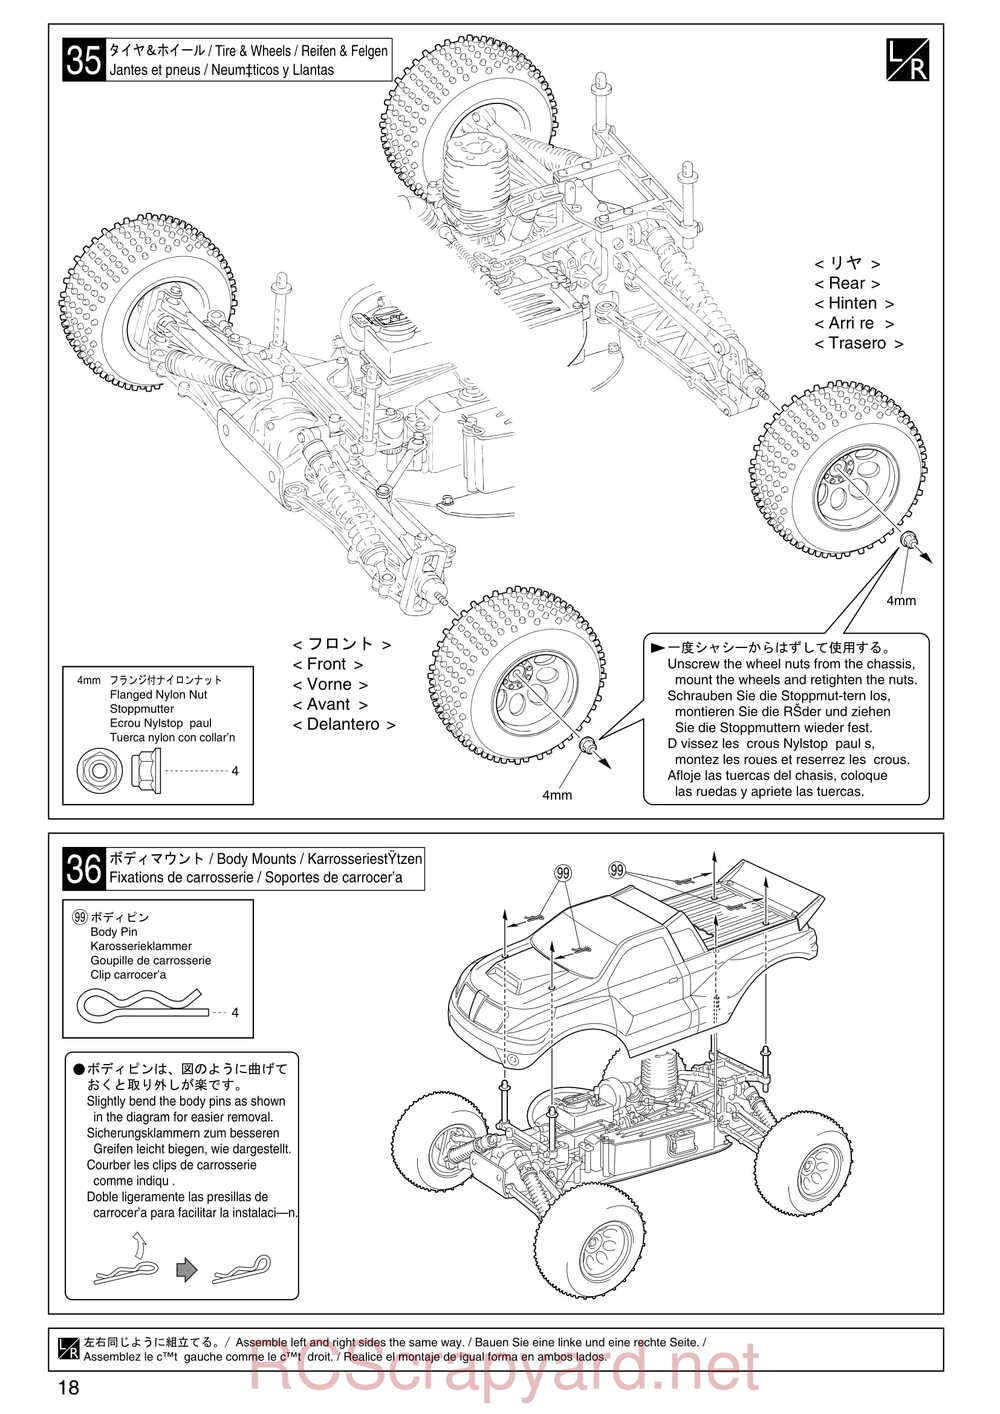 Kyosho - 31095 - TR-15 Stadium-Force - Manual - Page 18